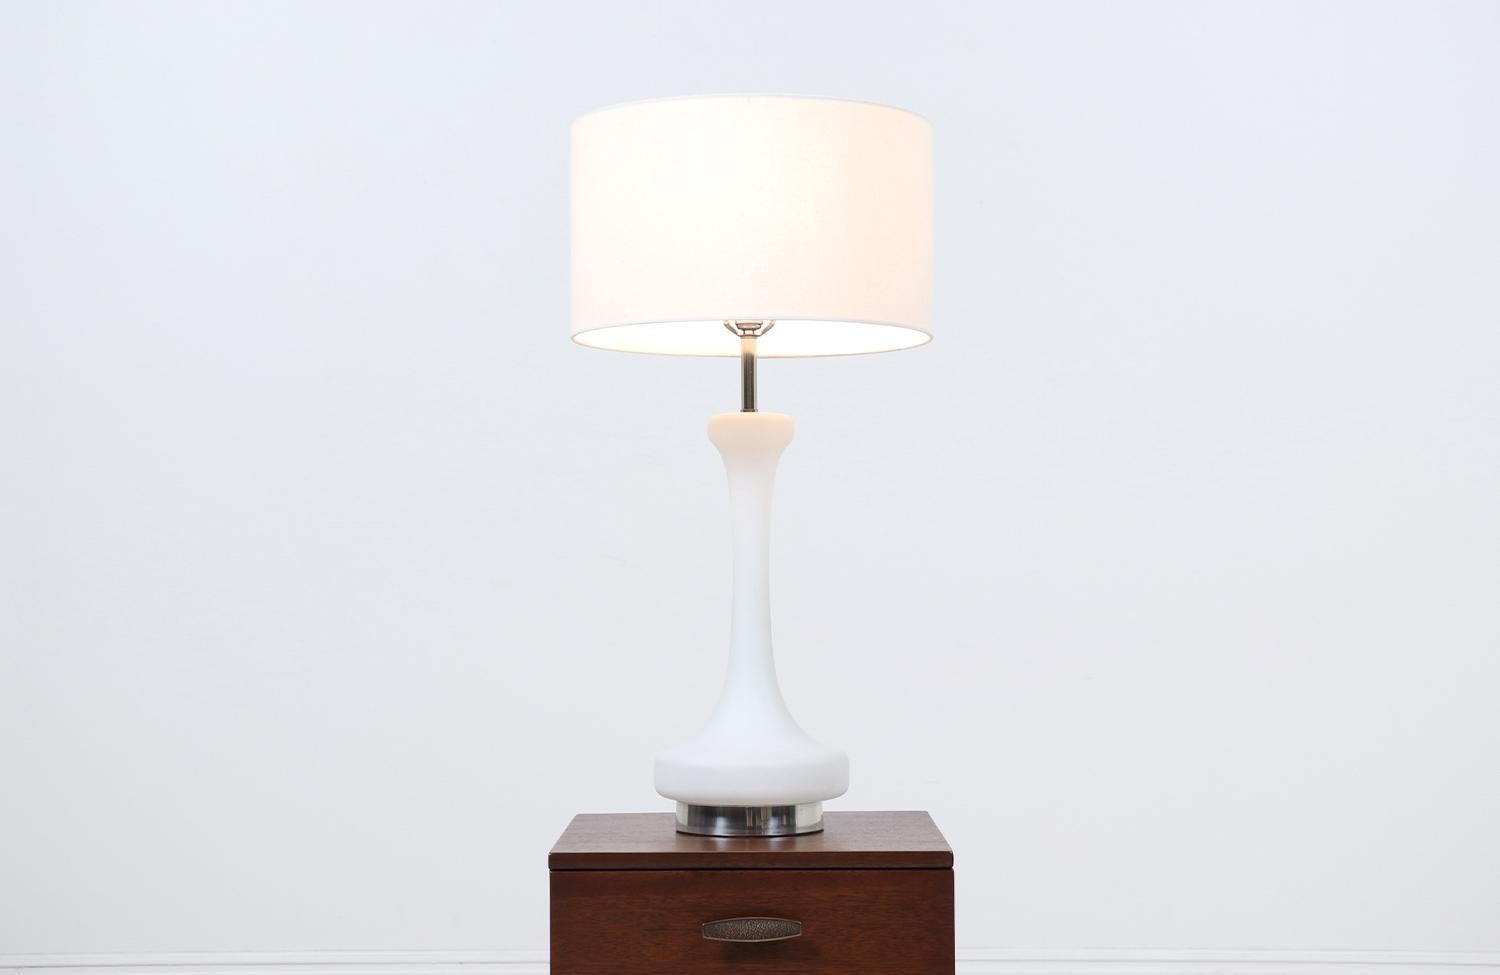 Mid-Century Modern frosted glass table Lamp by Laurel.

________________________________________

Transforming a piece of Mid-Century Modern furniture is like bringing history back to life, and we take this journey with passion and precision. With